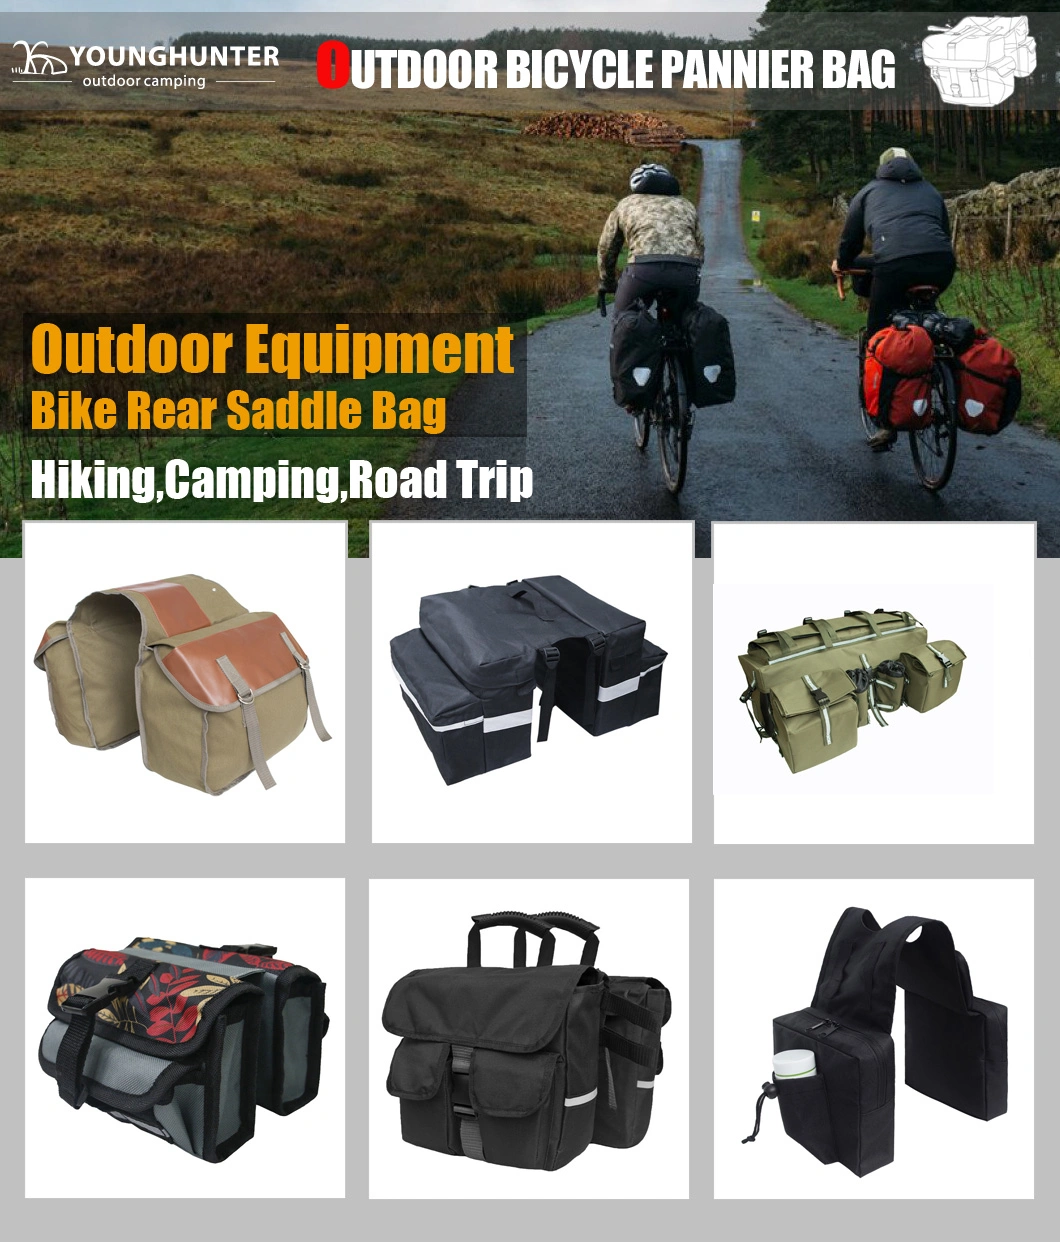 Waterproof Oxford Universal ATV Tank Saddle Bag Motorcycle Panniers - Luggage Storage Left for Quad Bike Snowmobile Scooter Best Motorcycle Backpack